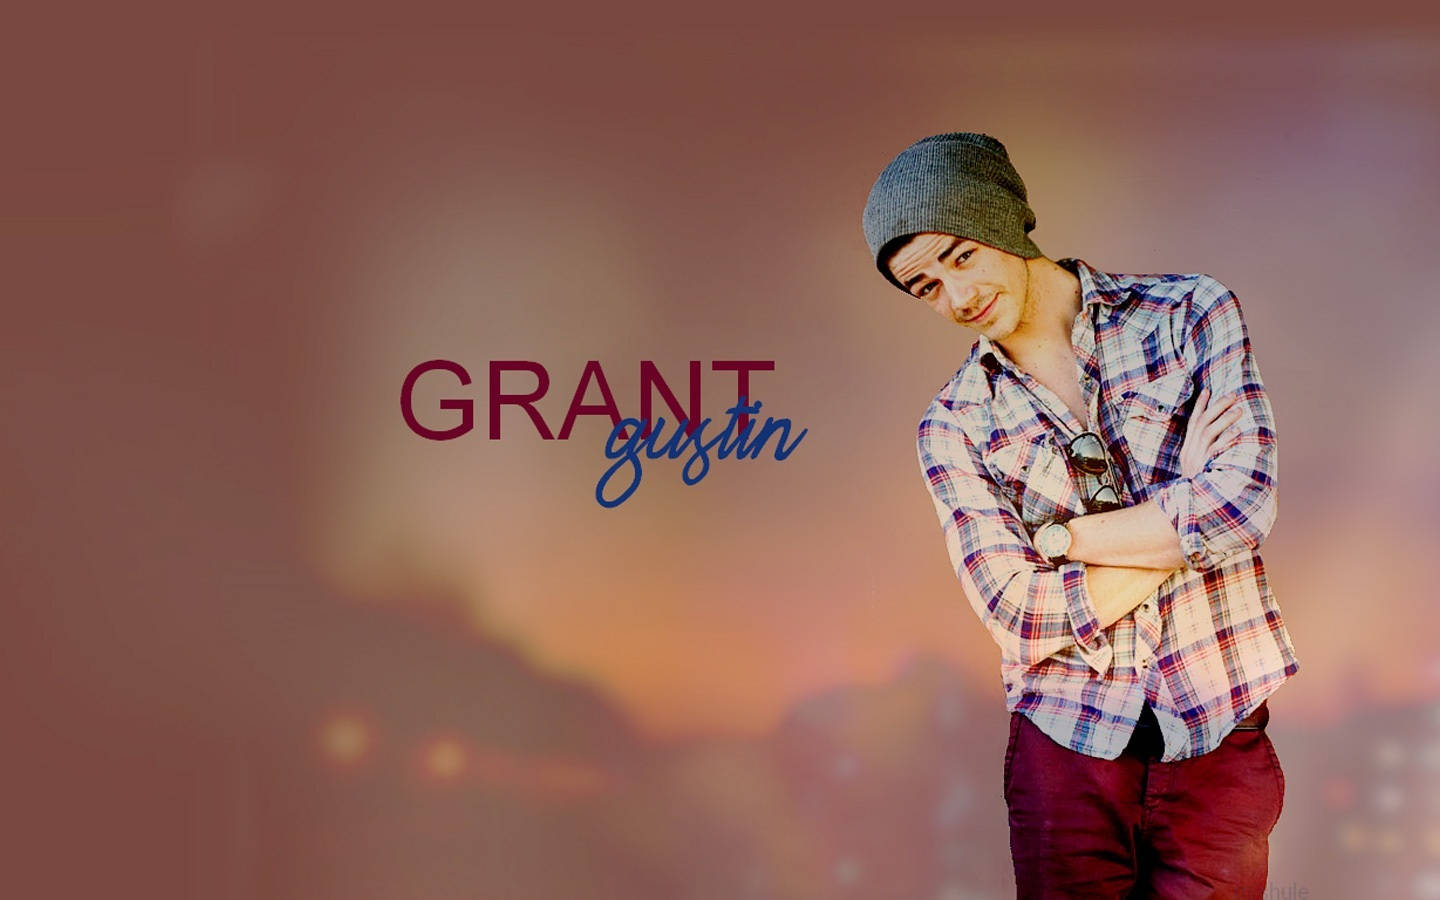 Grant Gustin Young Celebrity Background